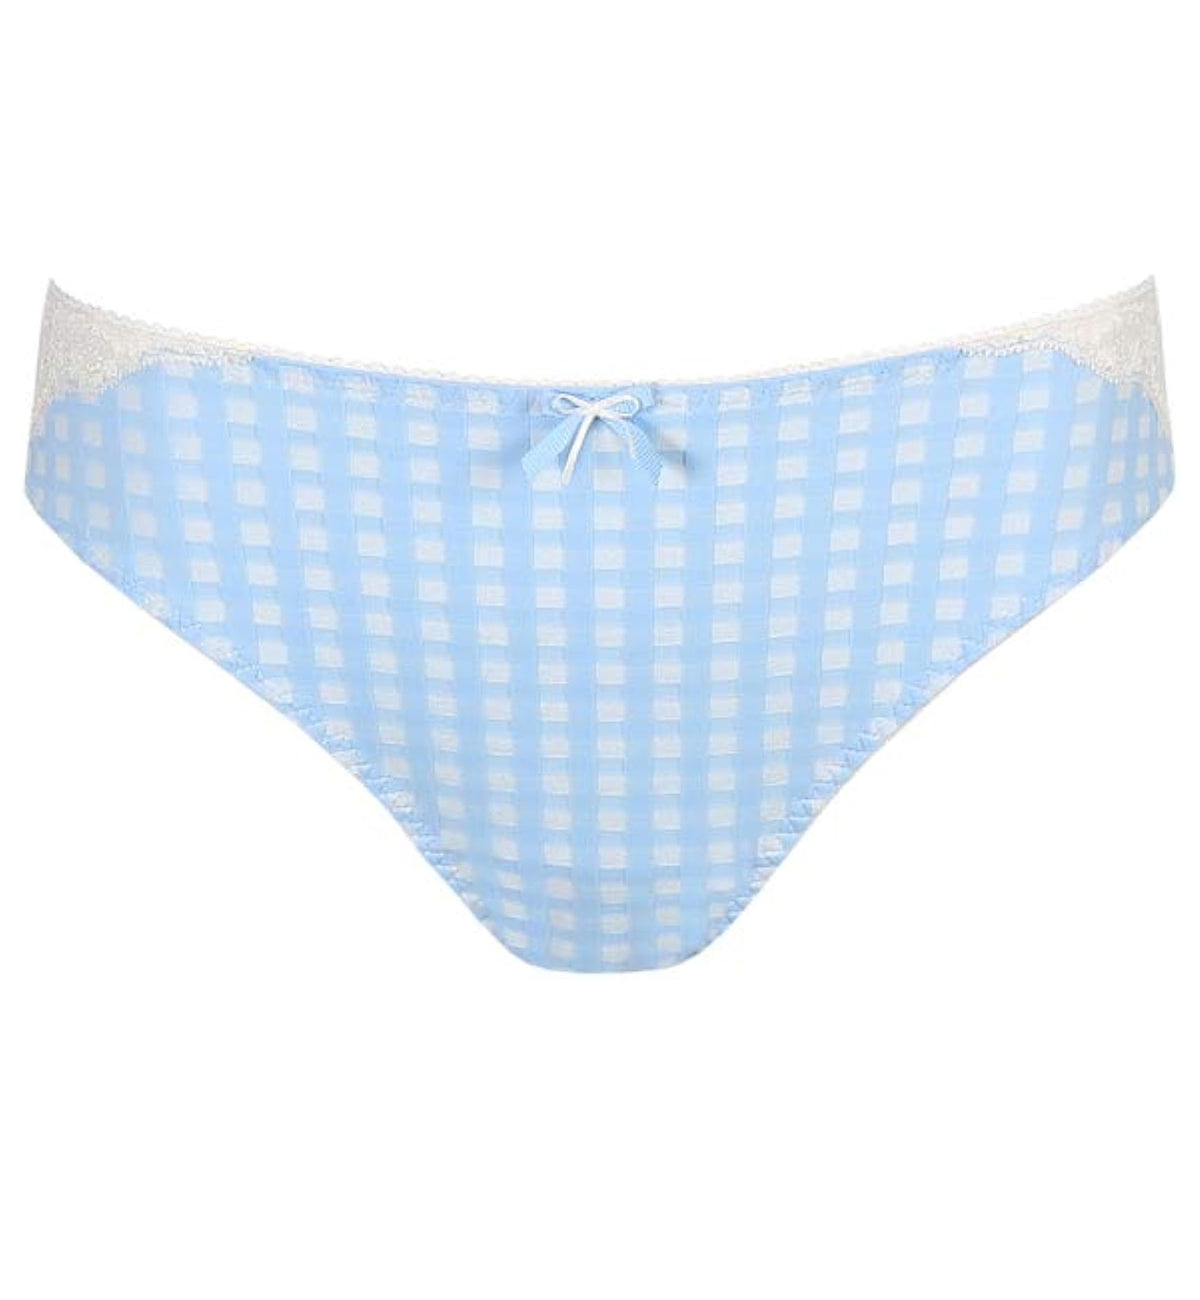 PrimaDonna Madison Matching Rio Brief (0562125),Large,Blue Bell - Blue Bell,Large